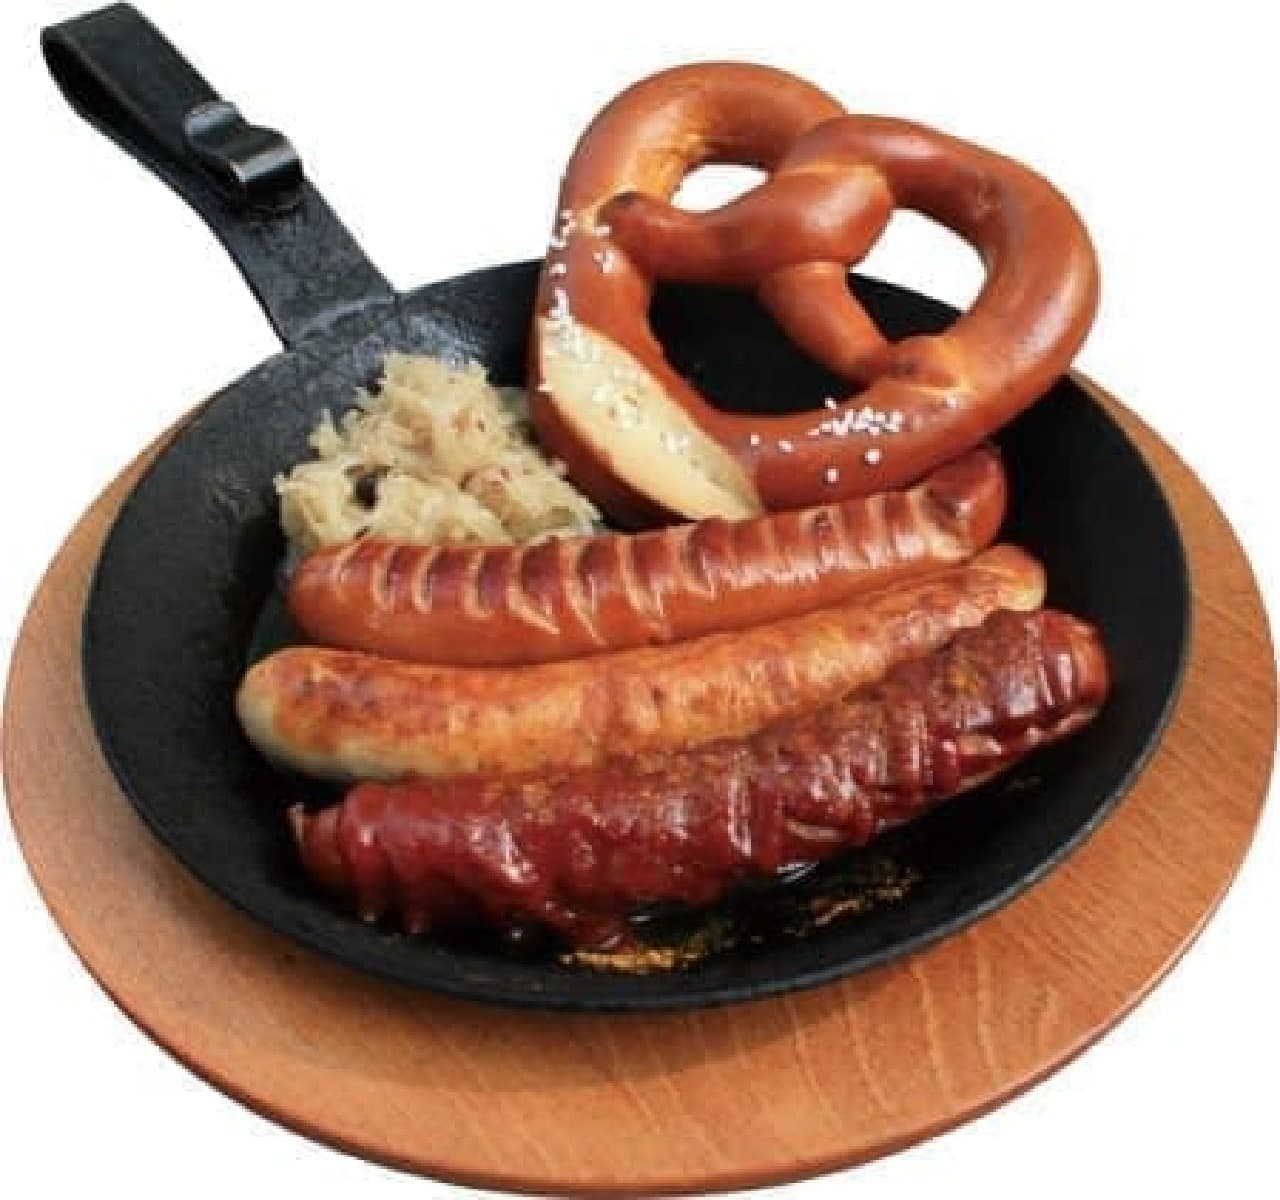 After all it is a genuine sausage for German beer.